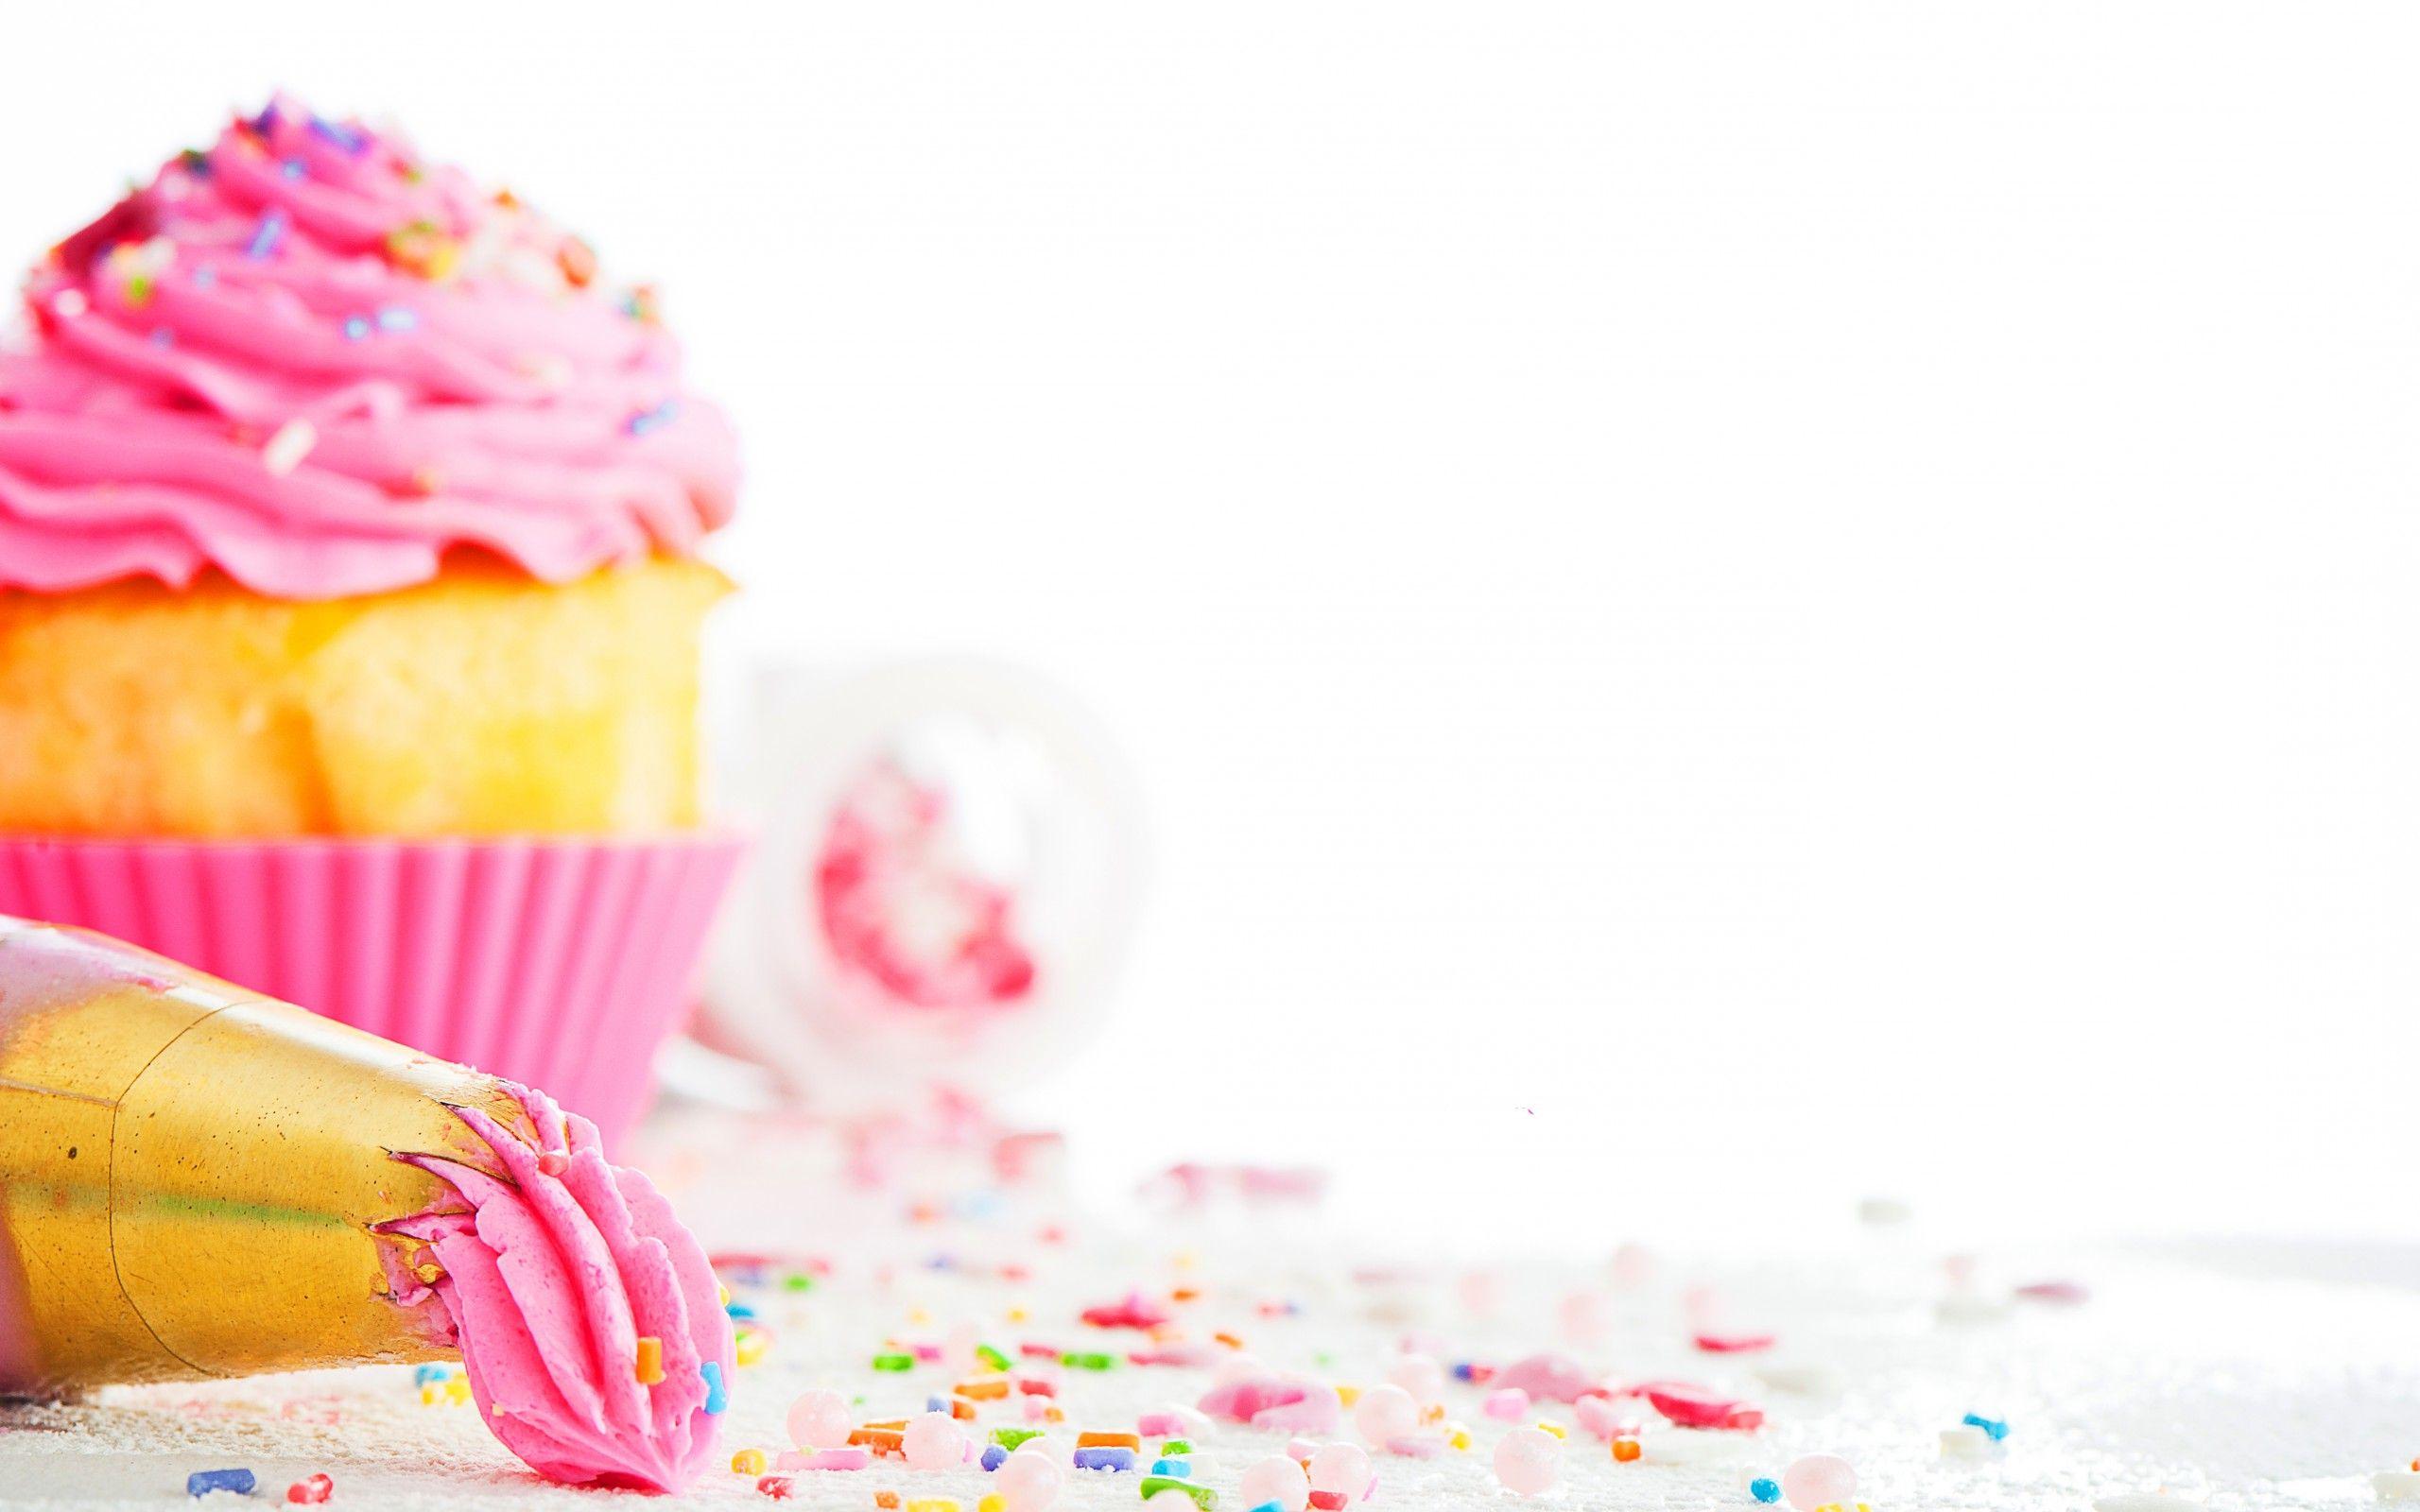 cupcake background 9. Background Check All